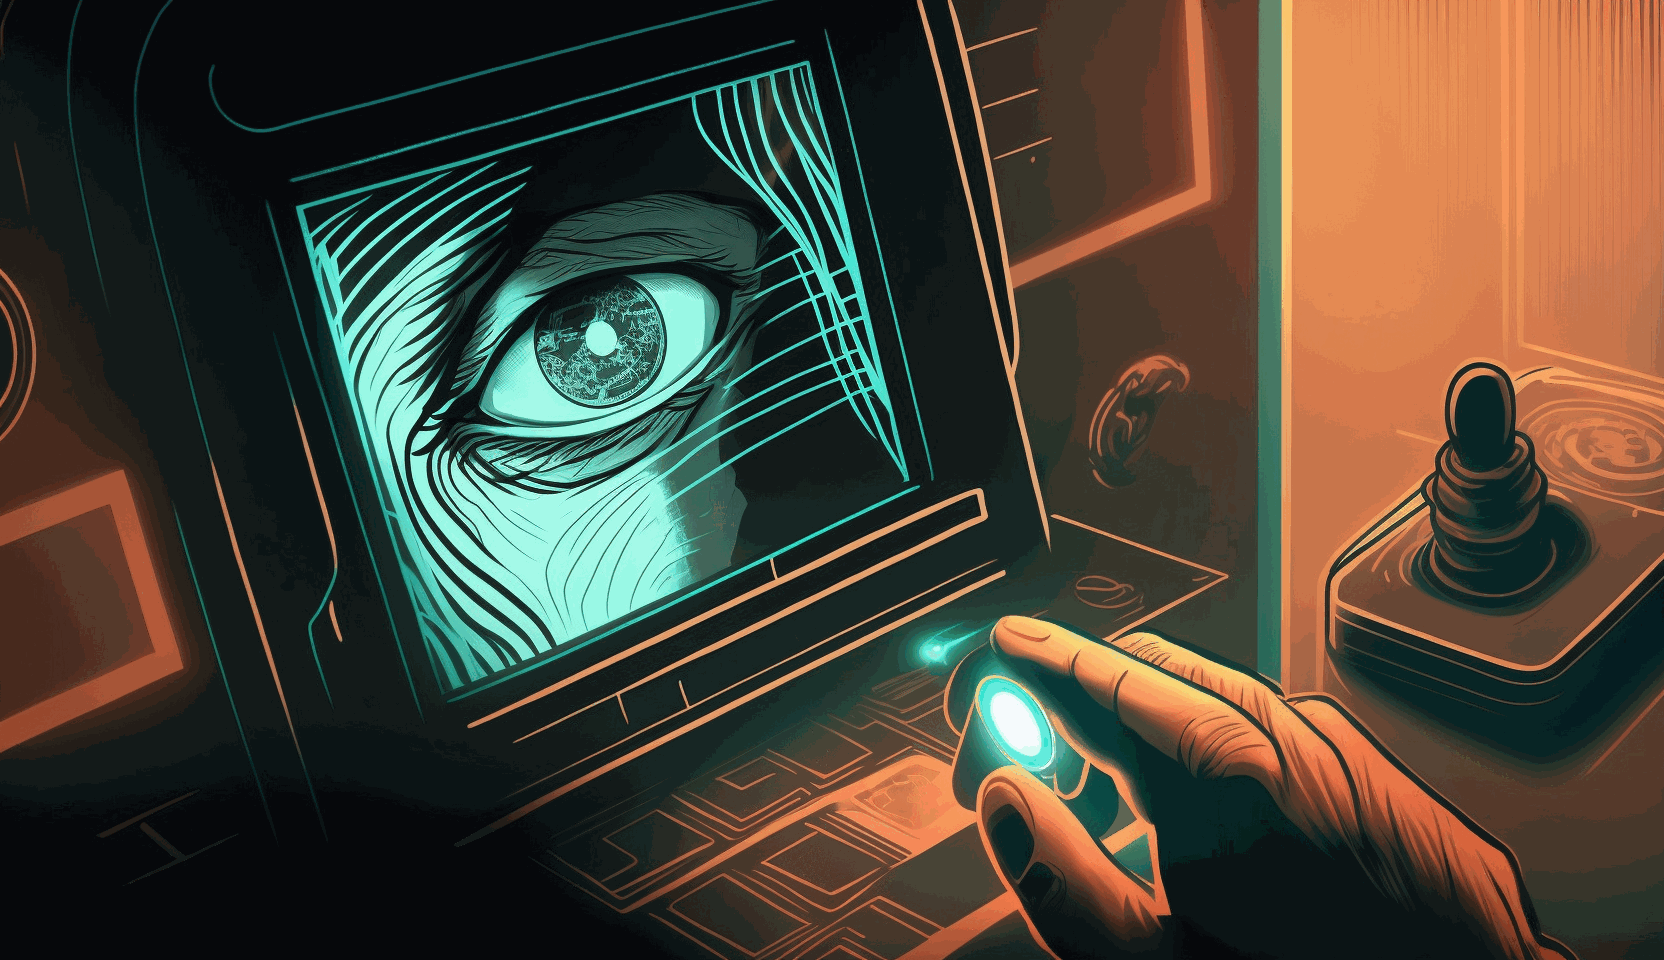 An animated illustration of a person's hand using a fingerprint scanner to access a secured area, with a person's face and iris also visible in the background.